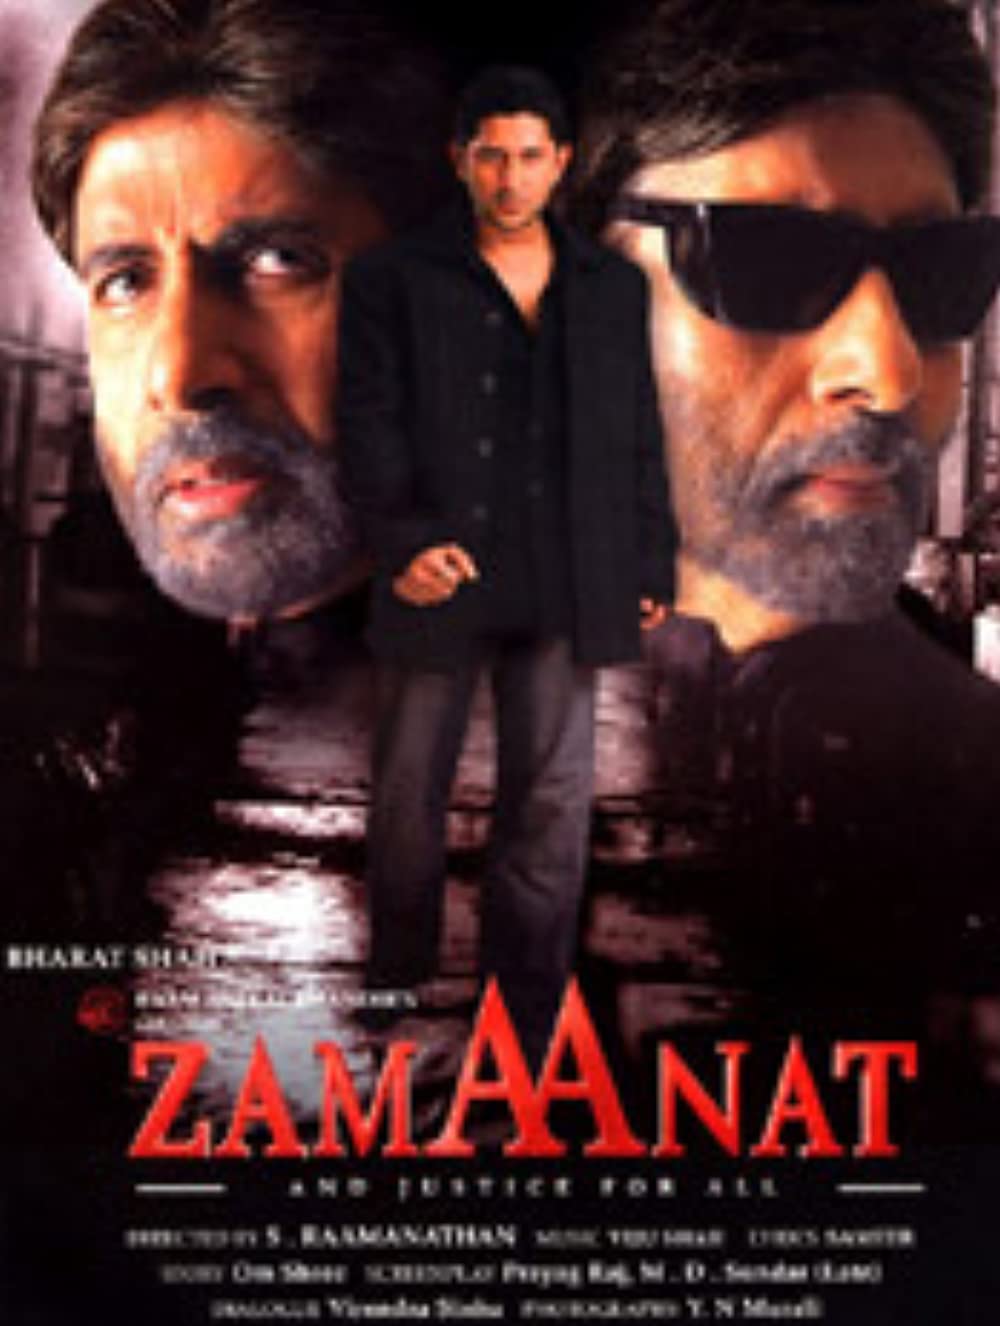 Zamaanat And Justice for All